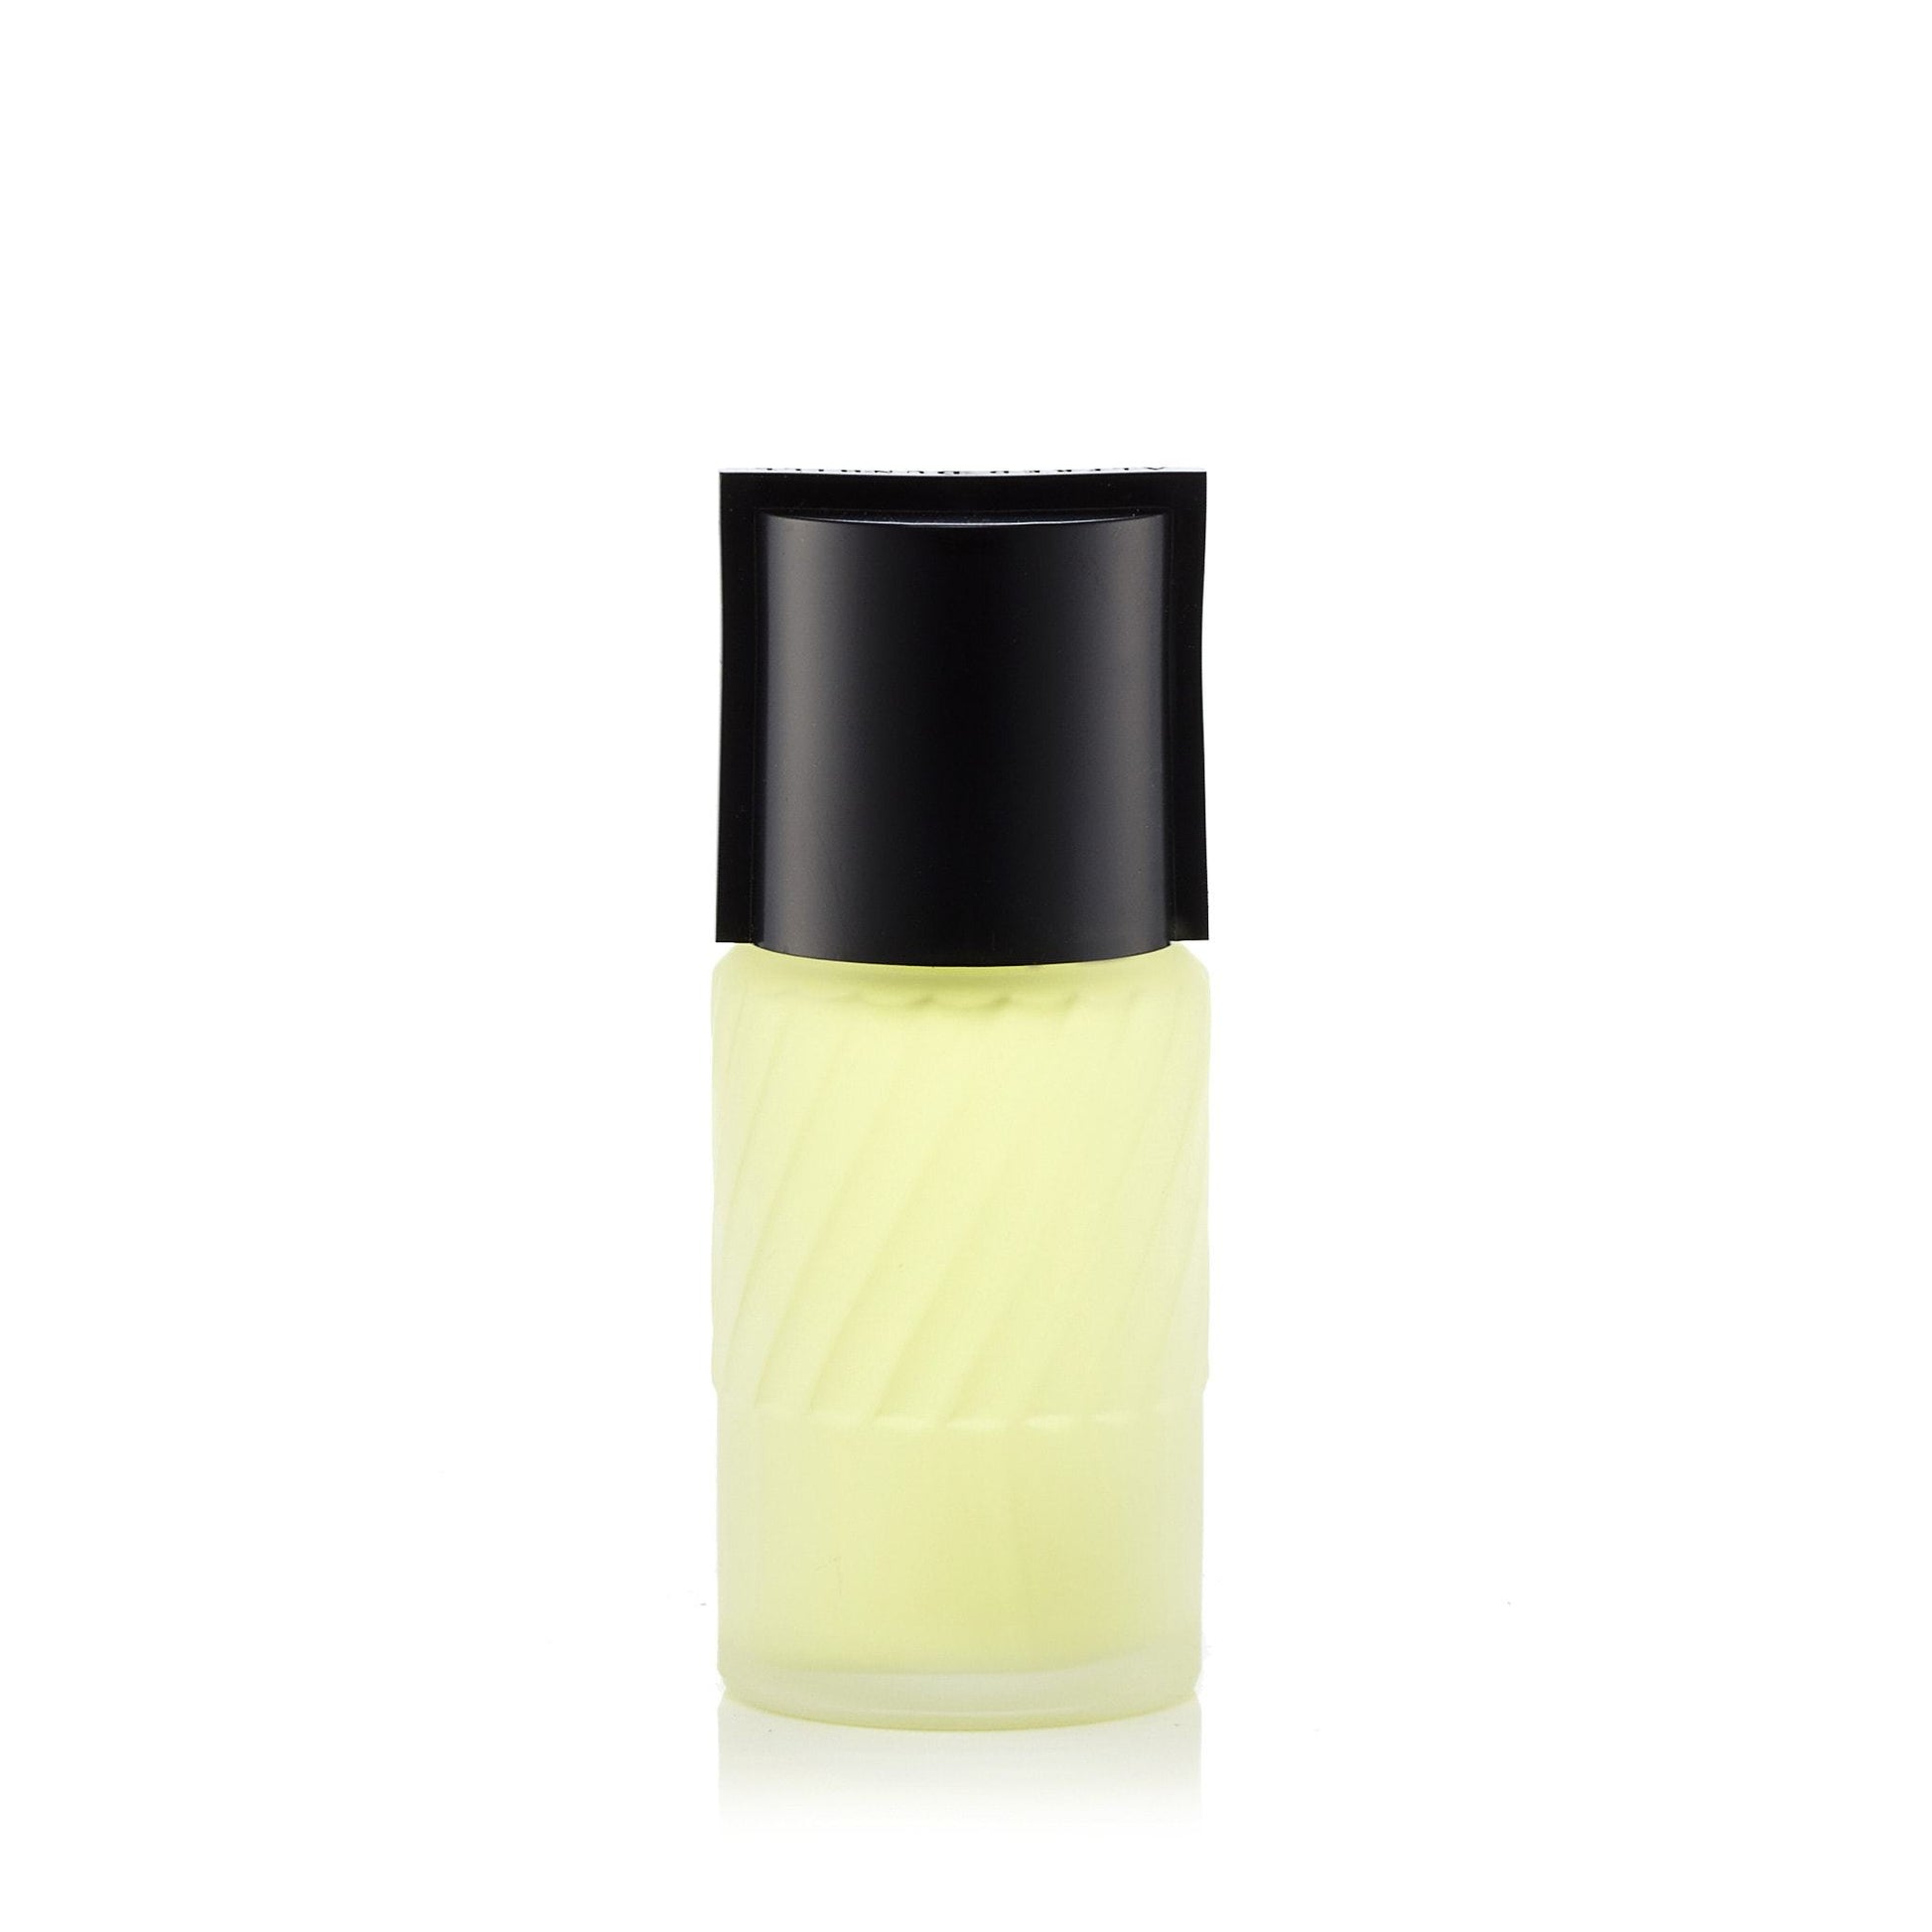 Edition Eau de Toilette Spray for Men by Alfred Dunhill, Product image 1